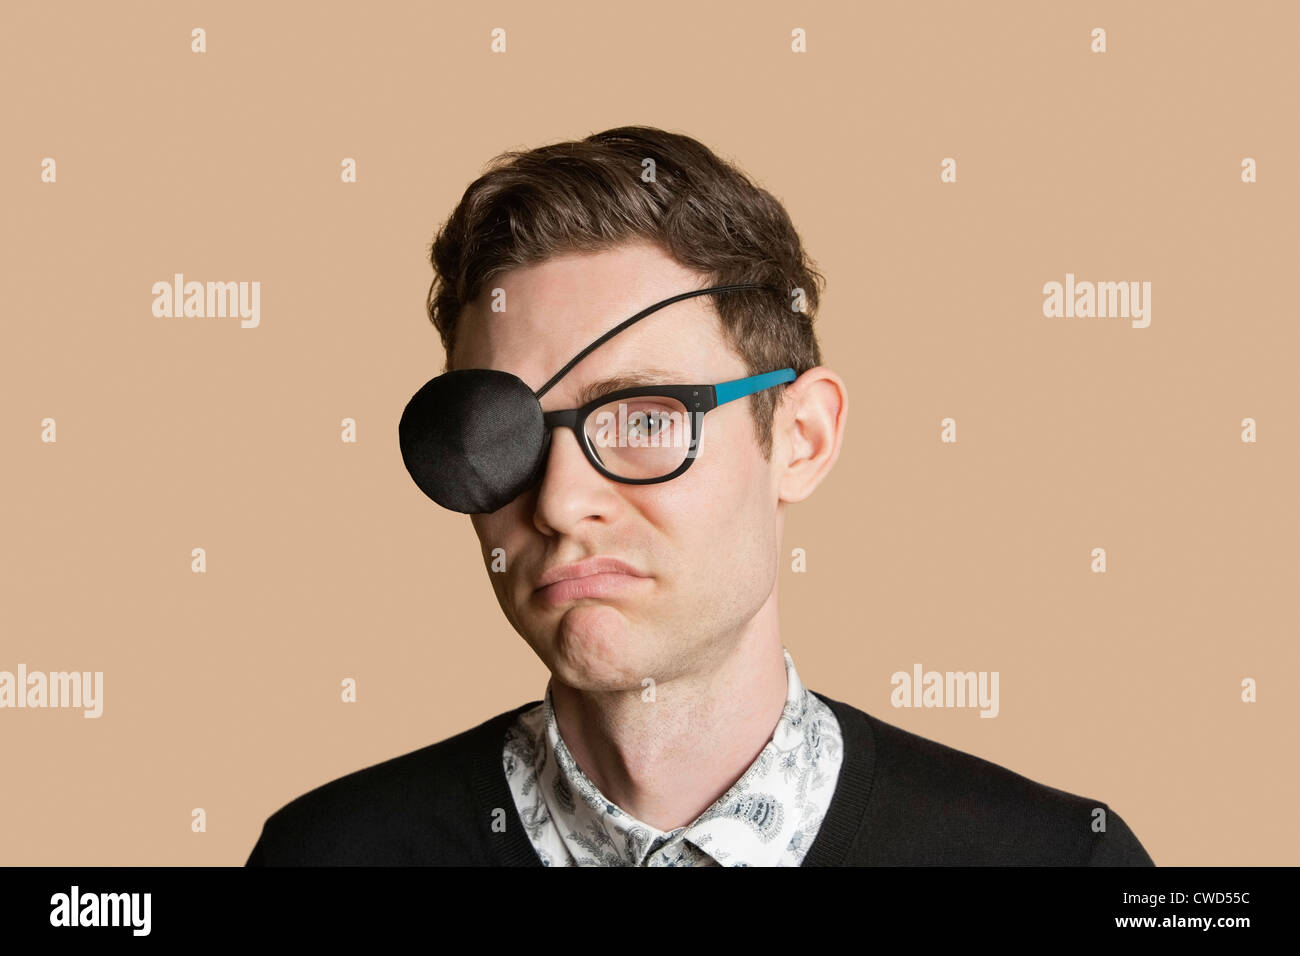 Portrait of a man wearing eye patch on glasses over colored background Stock Photo